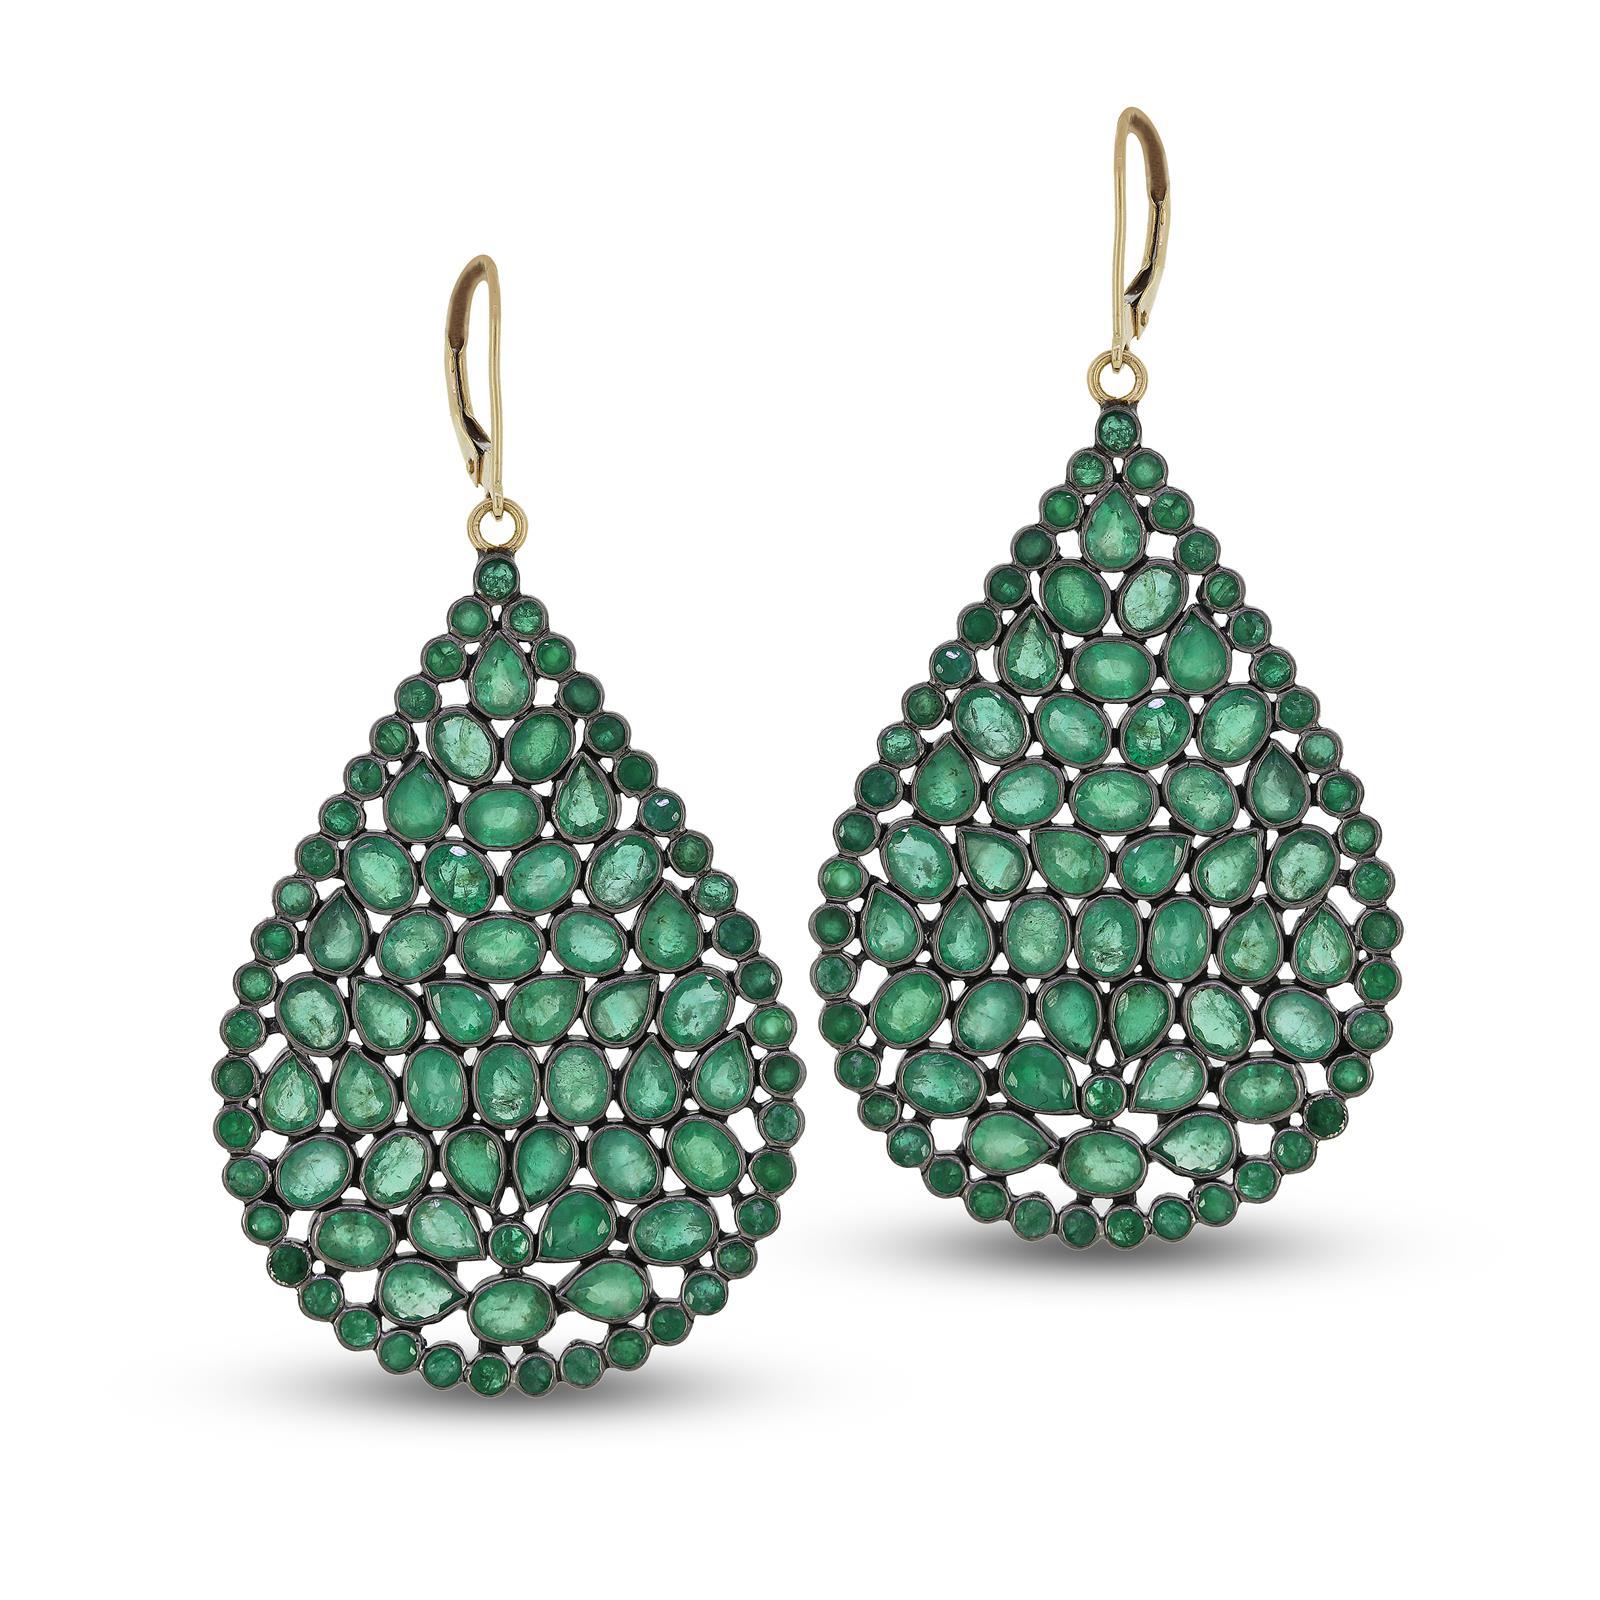 Gemistry 16cts Emerald Victorian Pear Drop Earrings in 18k/14k Sterling Silver In New Condition For Sale In New York, NY